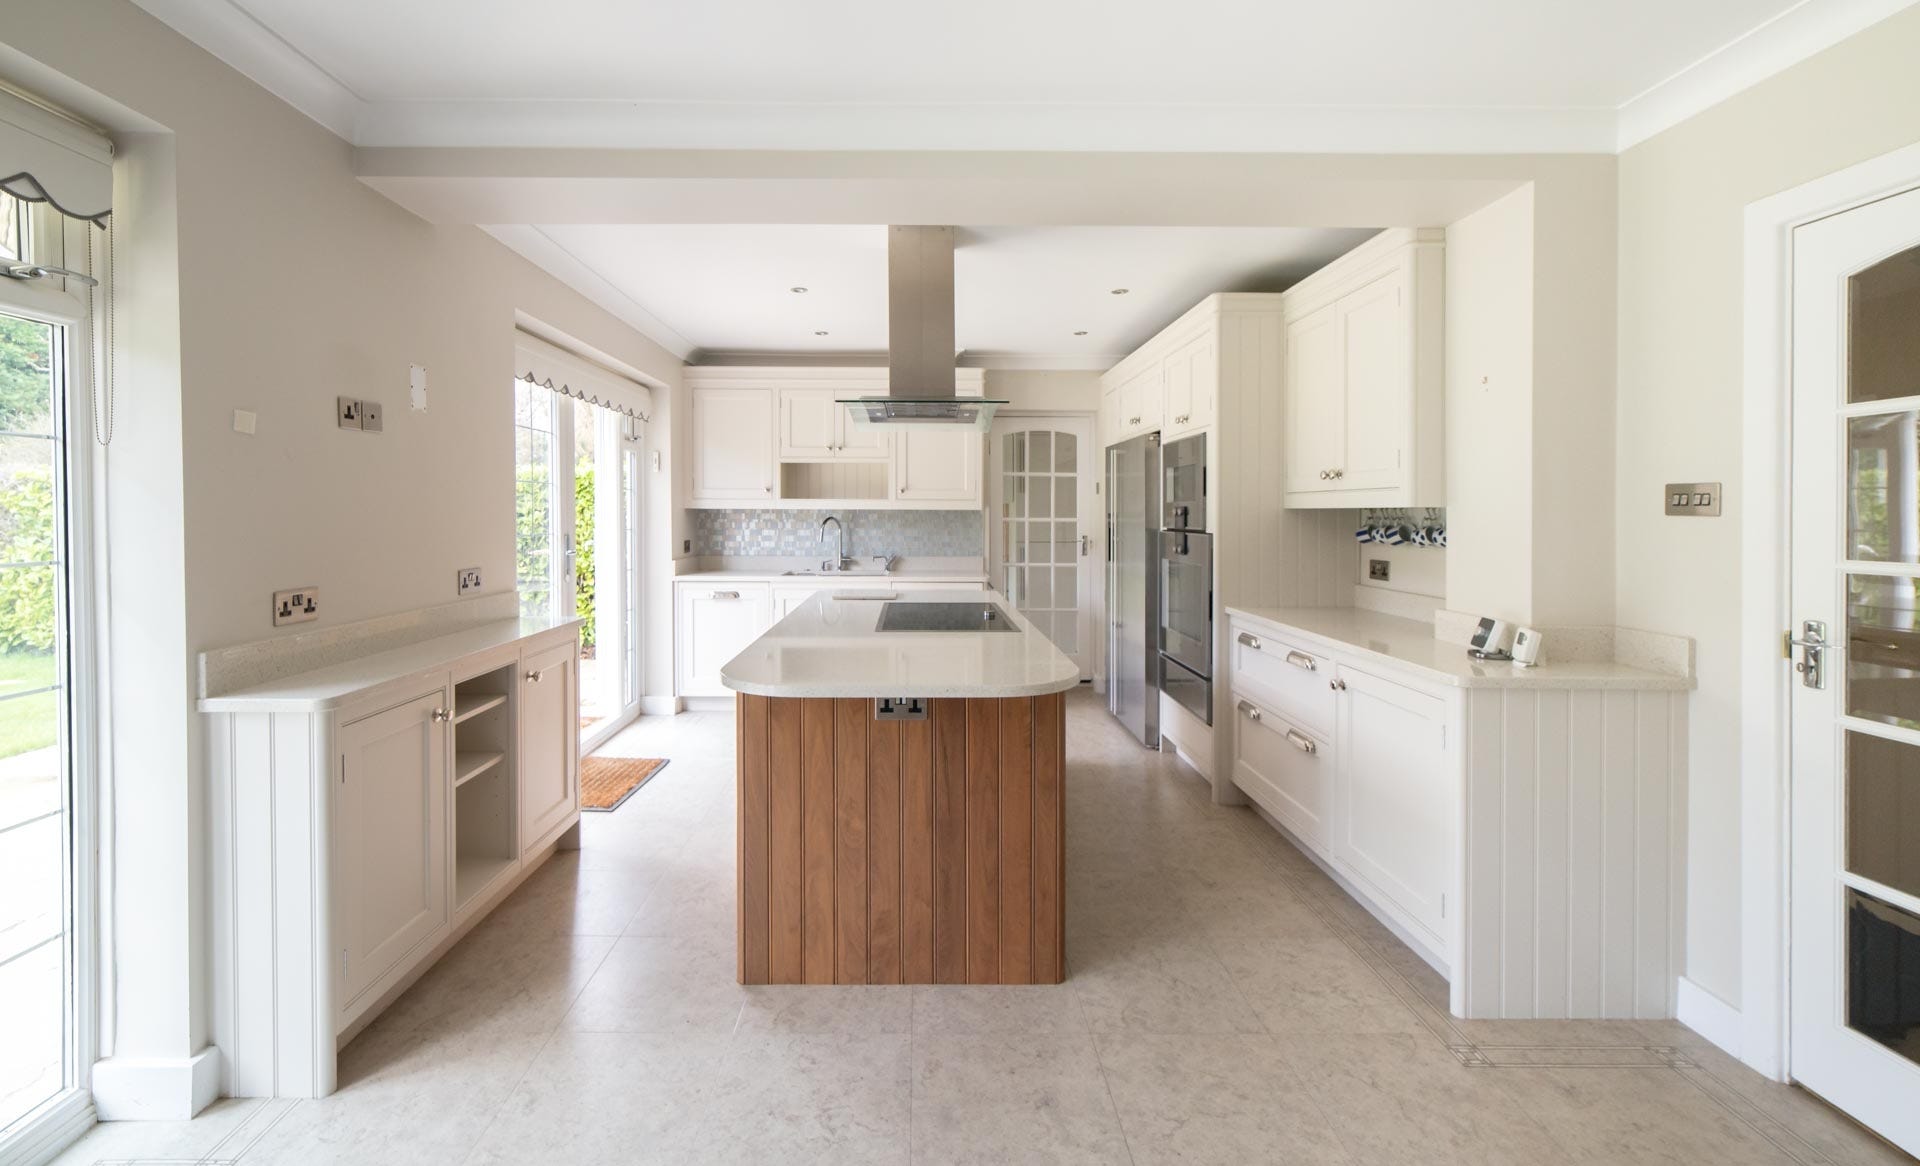 Approved Used Kitchen, Davonport In Frame, Gaggenau Appliances, Essex